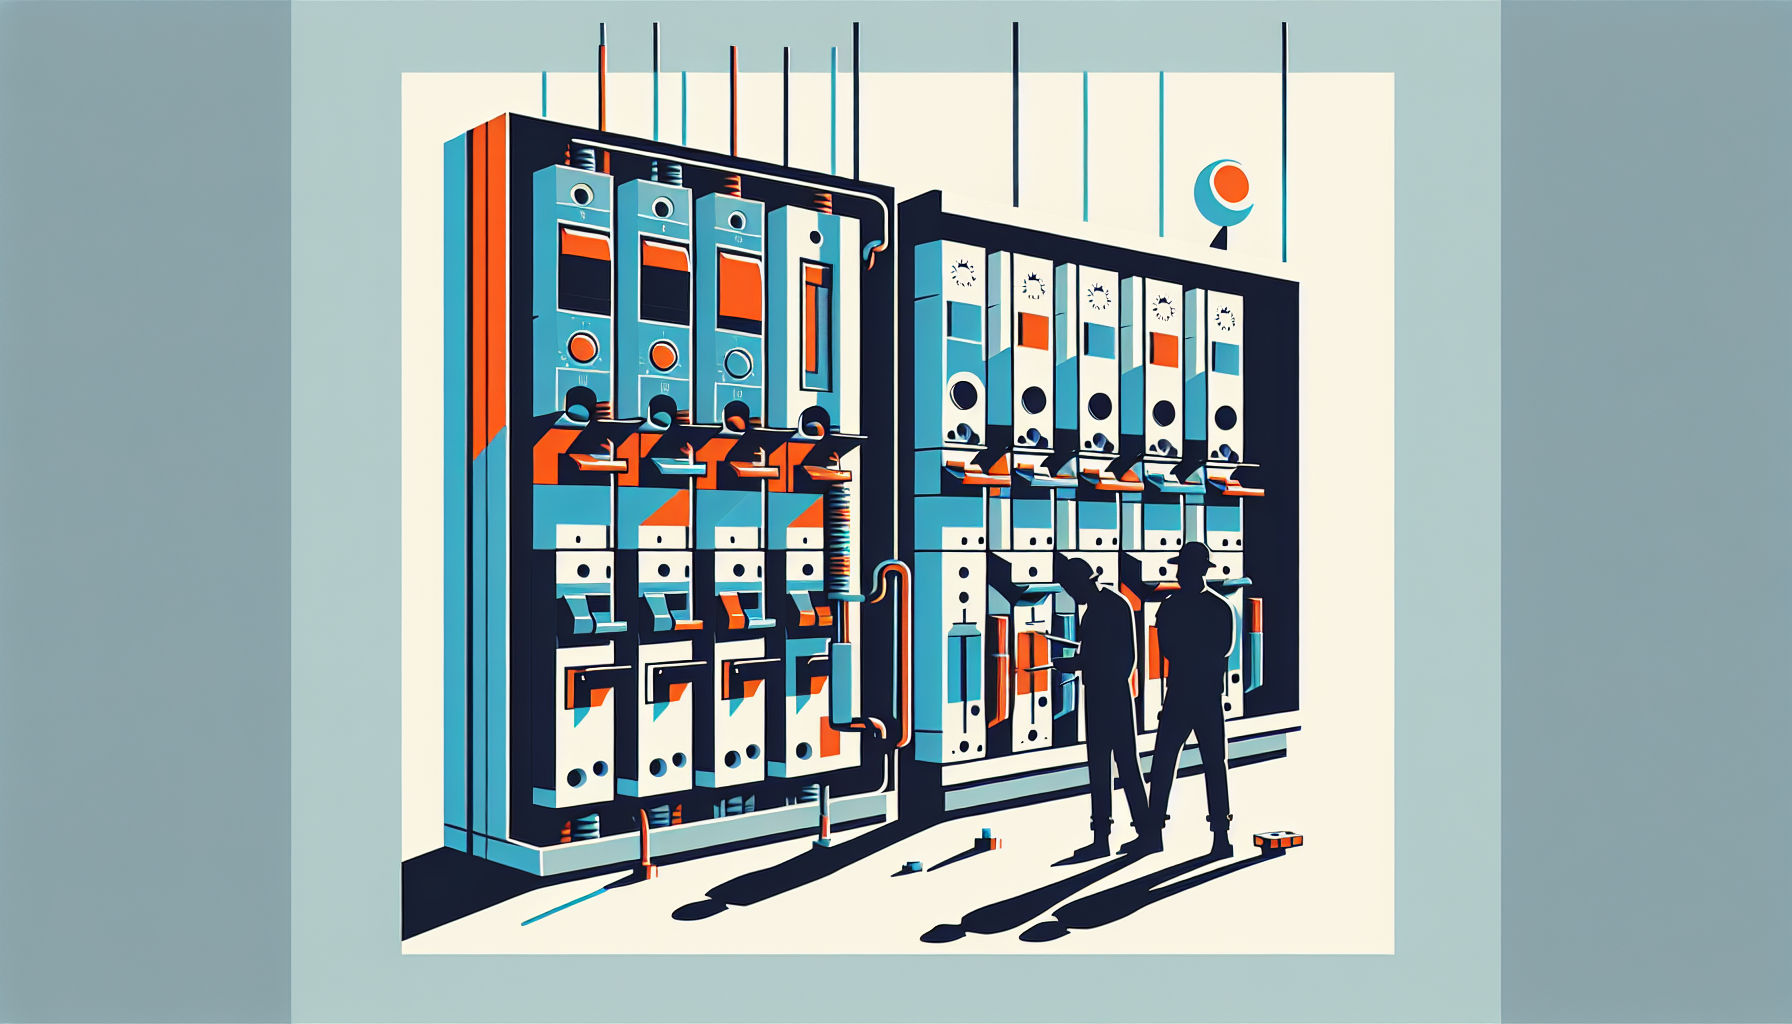 Illustration of circuit breakers in an electrical panel for a circuit breaker sizing guide